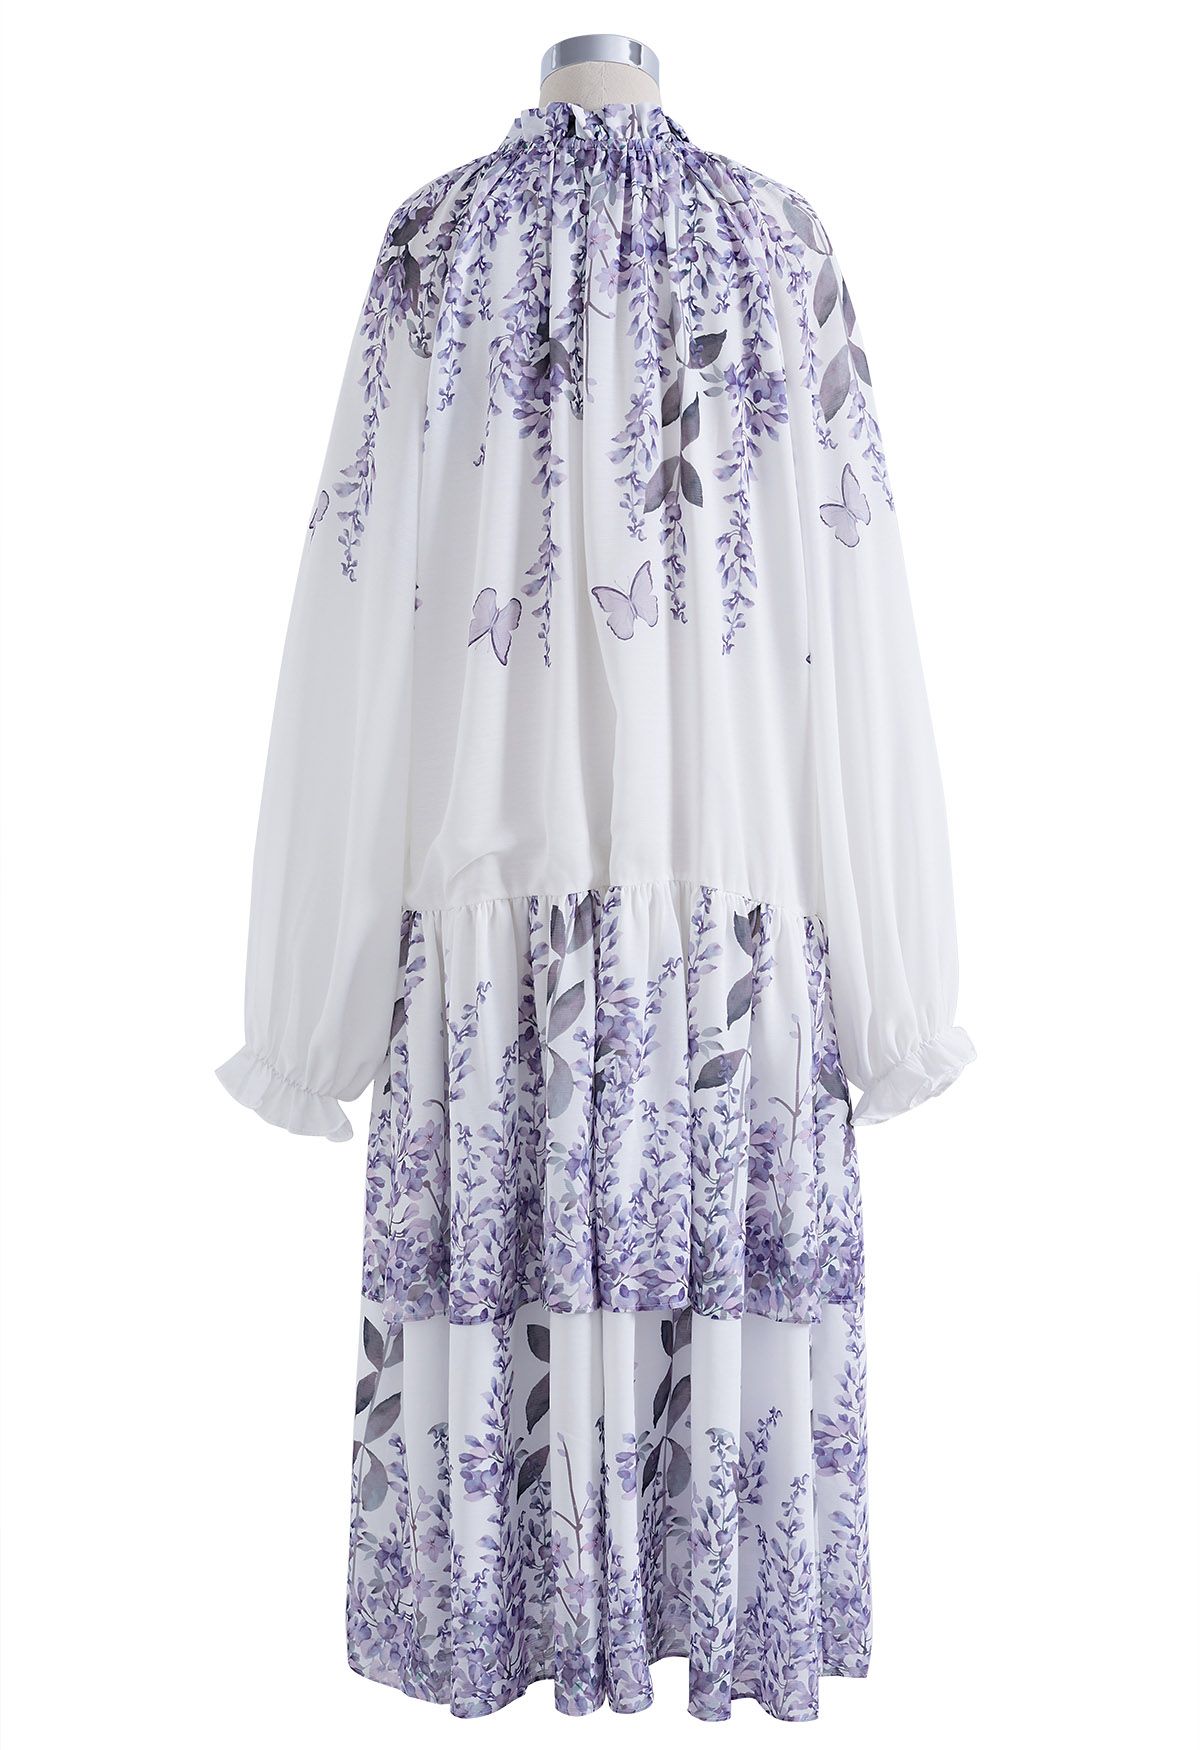 Lavender Print Bubble Sleeve Tiered Dress